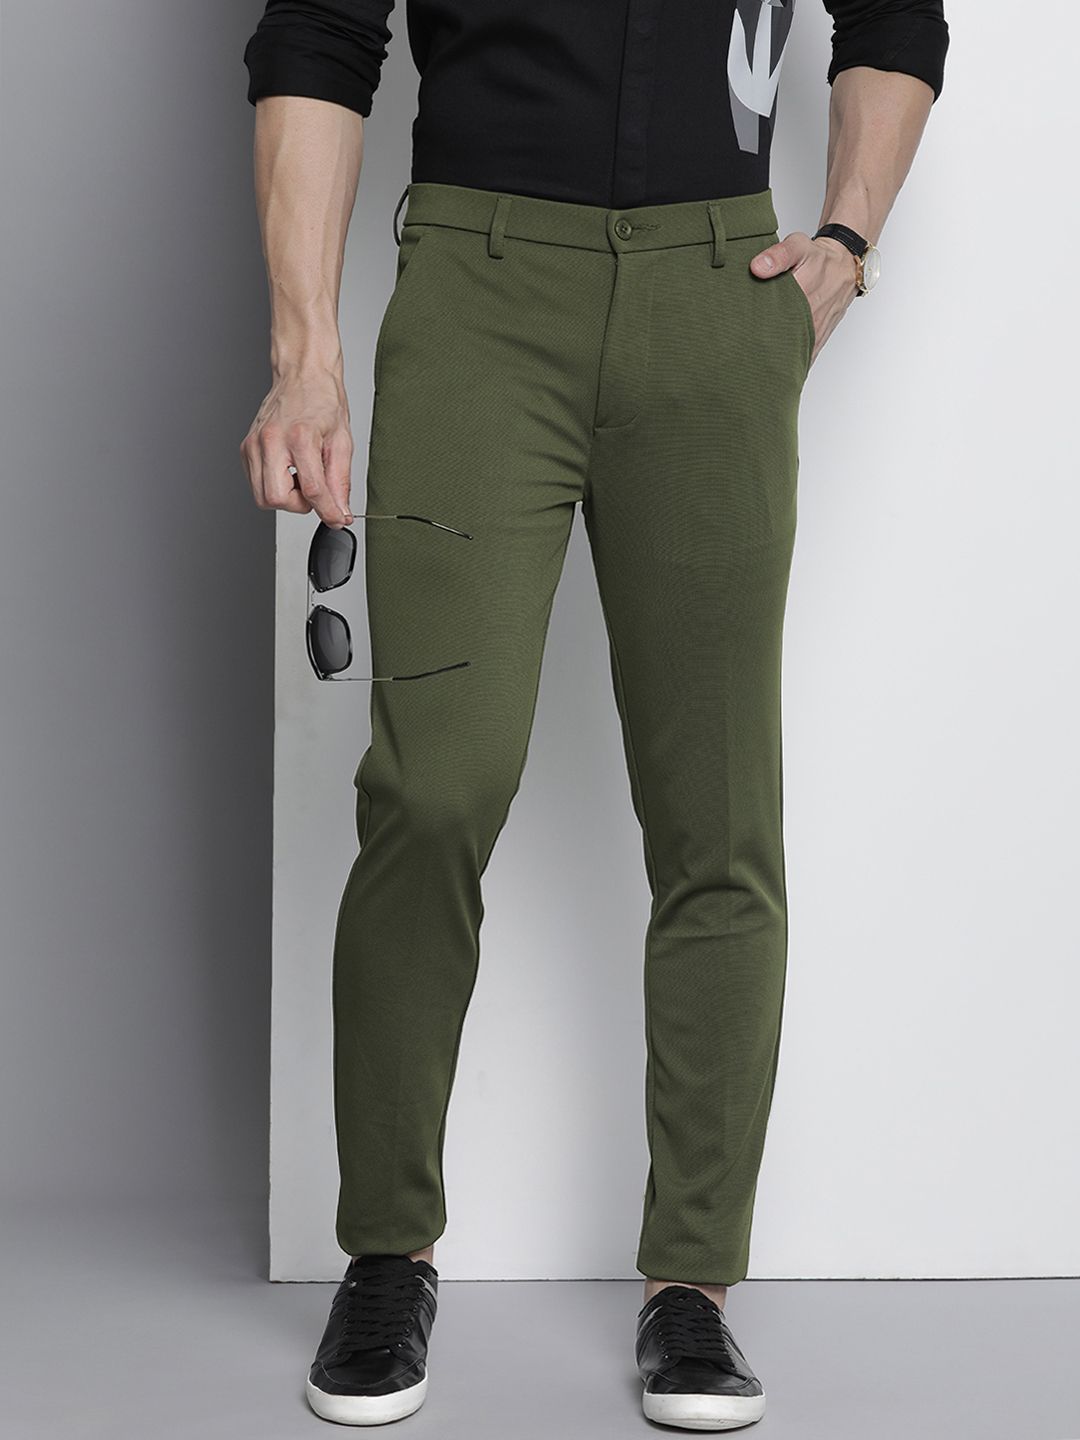 Buy The Indian Garage Co Men's Slim Casual Pants (0419-CARGO02-08-  Olive_30) at Amazon.in